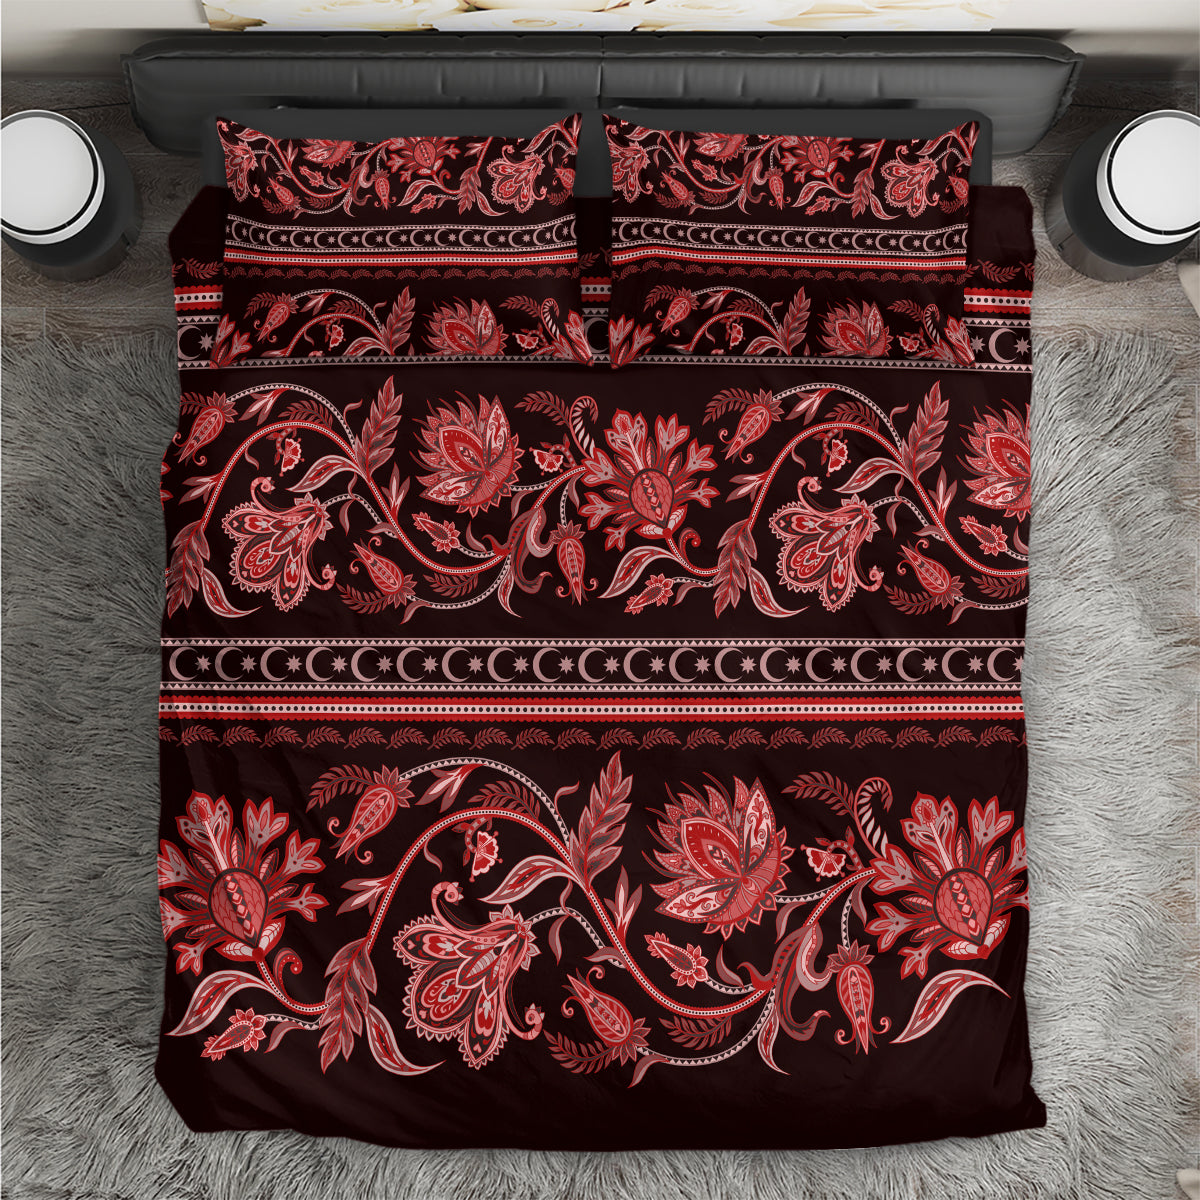 azerbaijan-bedding-set-traditional-pattern-ornament-with-flowers-buta-red